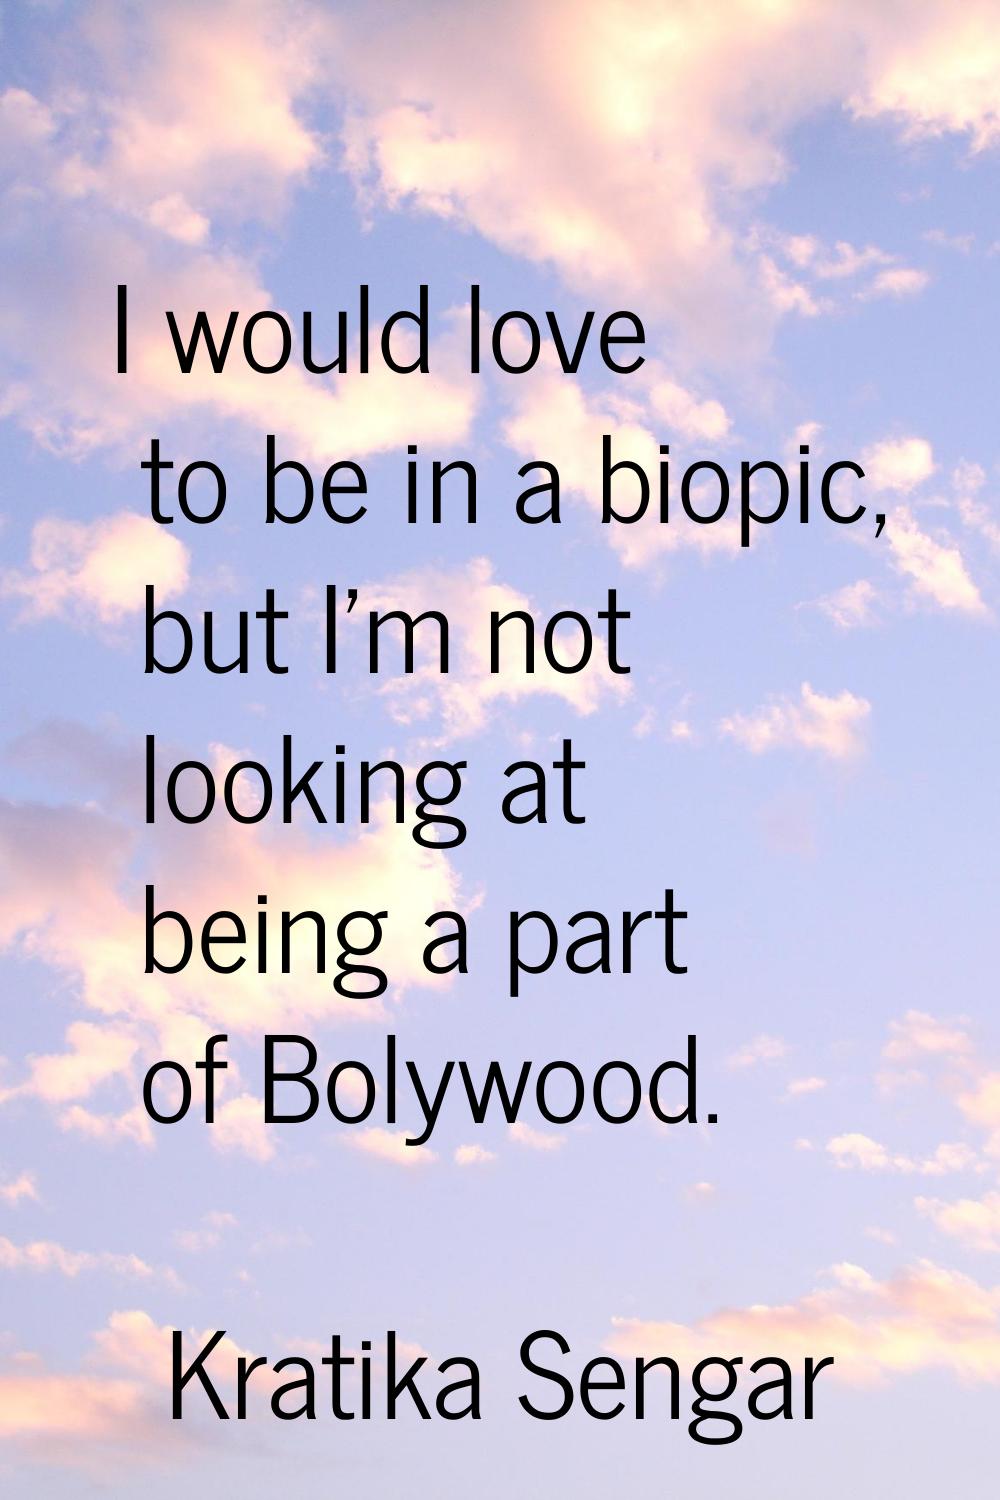 I would love to be in a biopic, but I'm not looking at being a part of Bolywood.